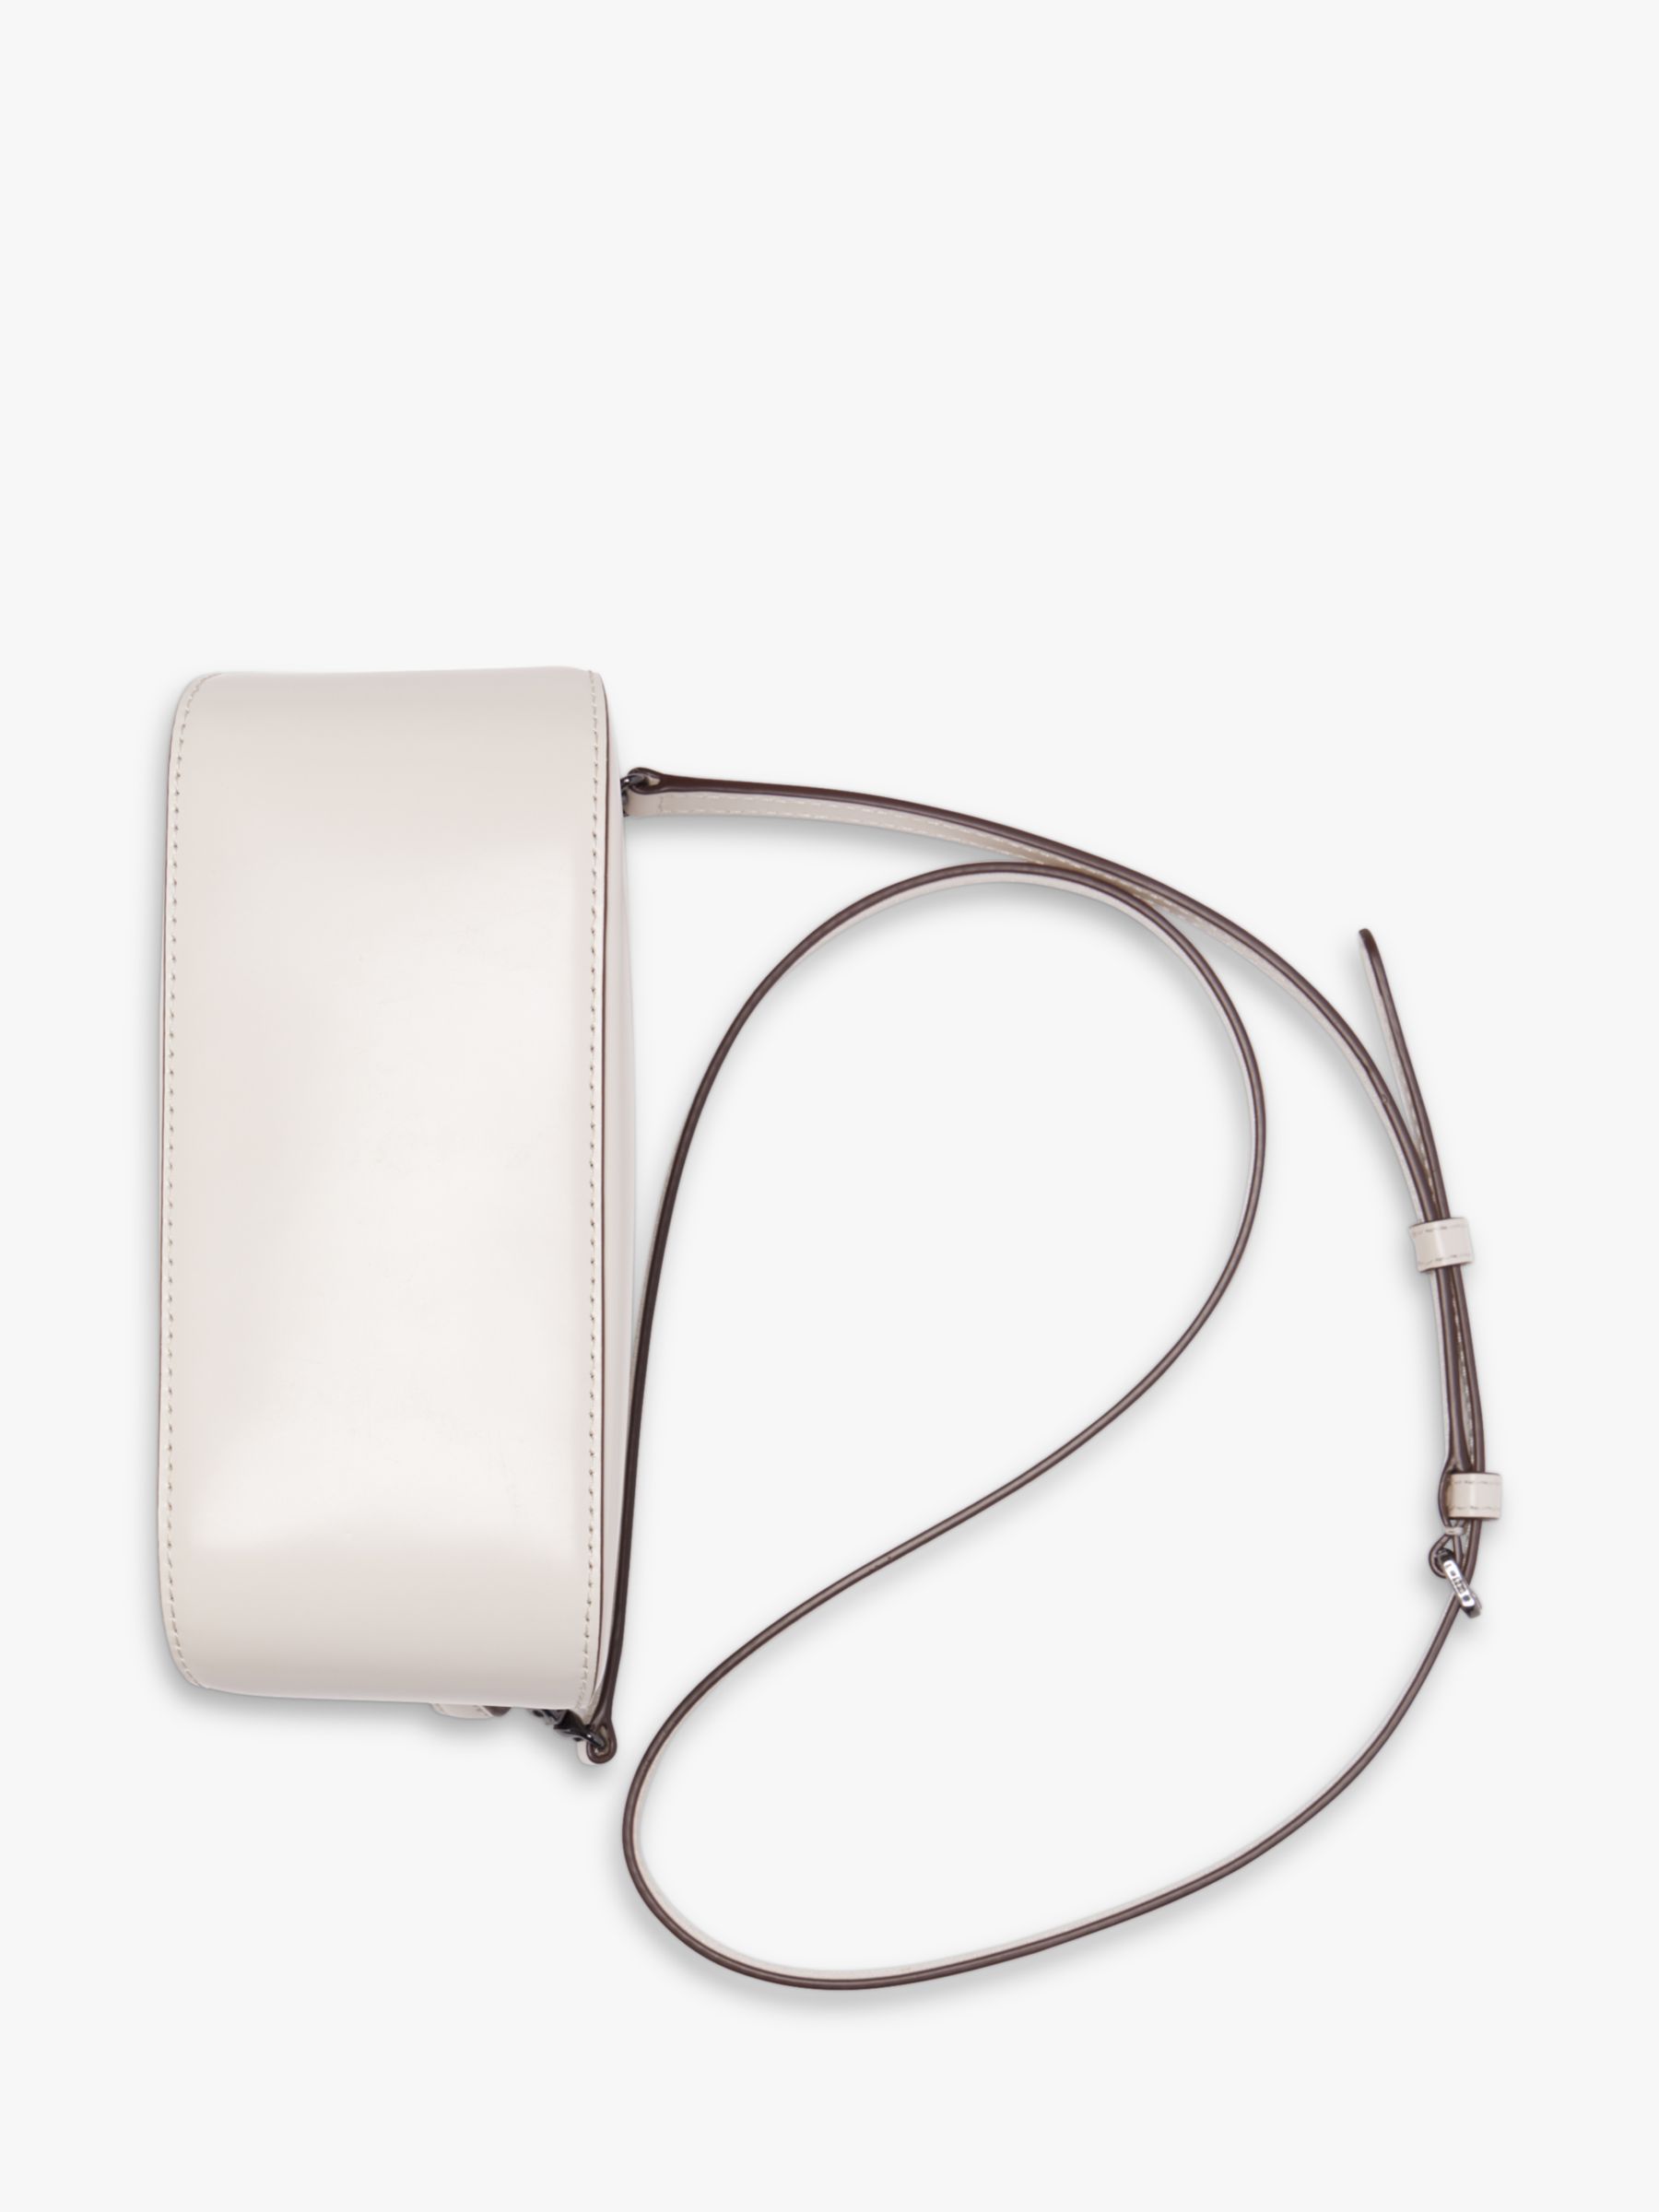 THE ROW Ellie leather clutch